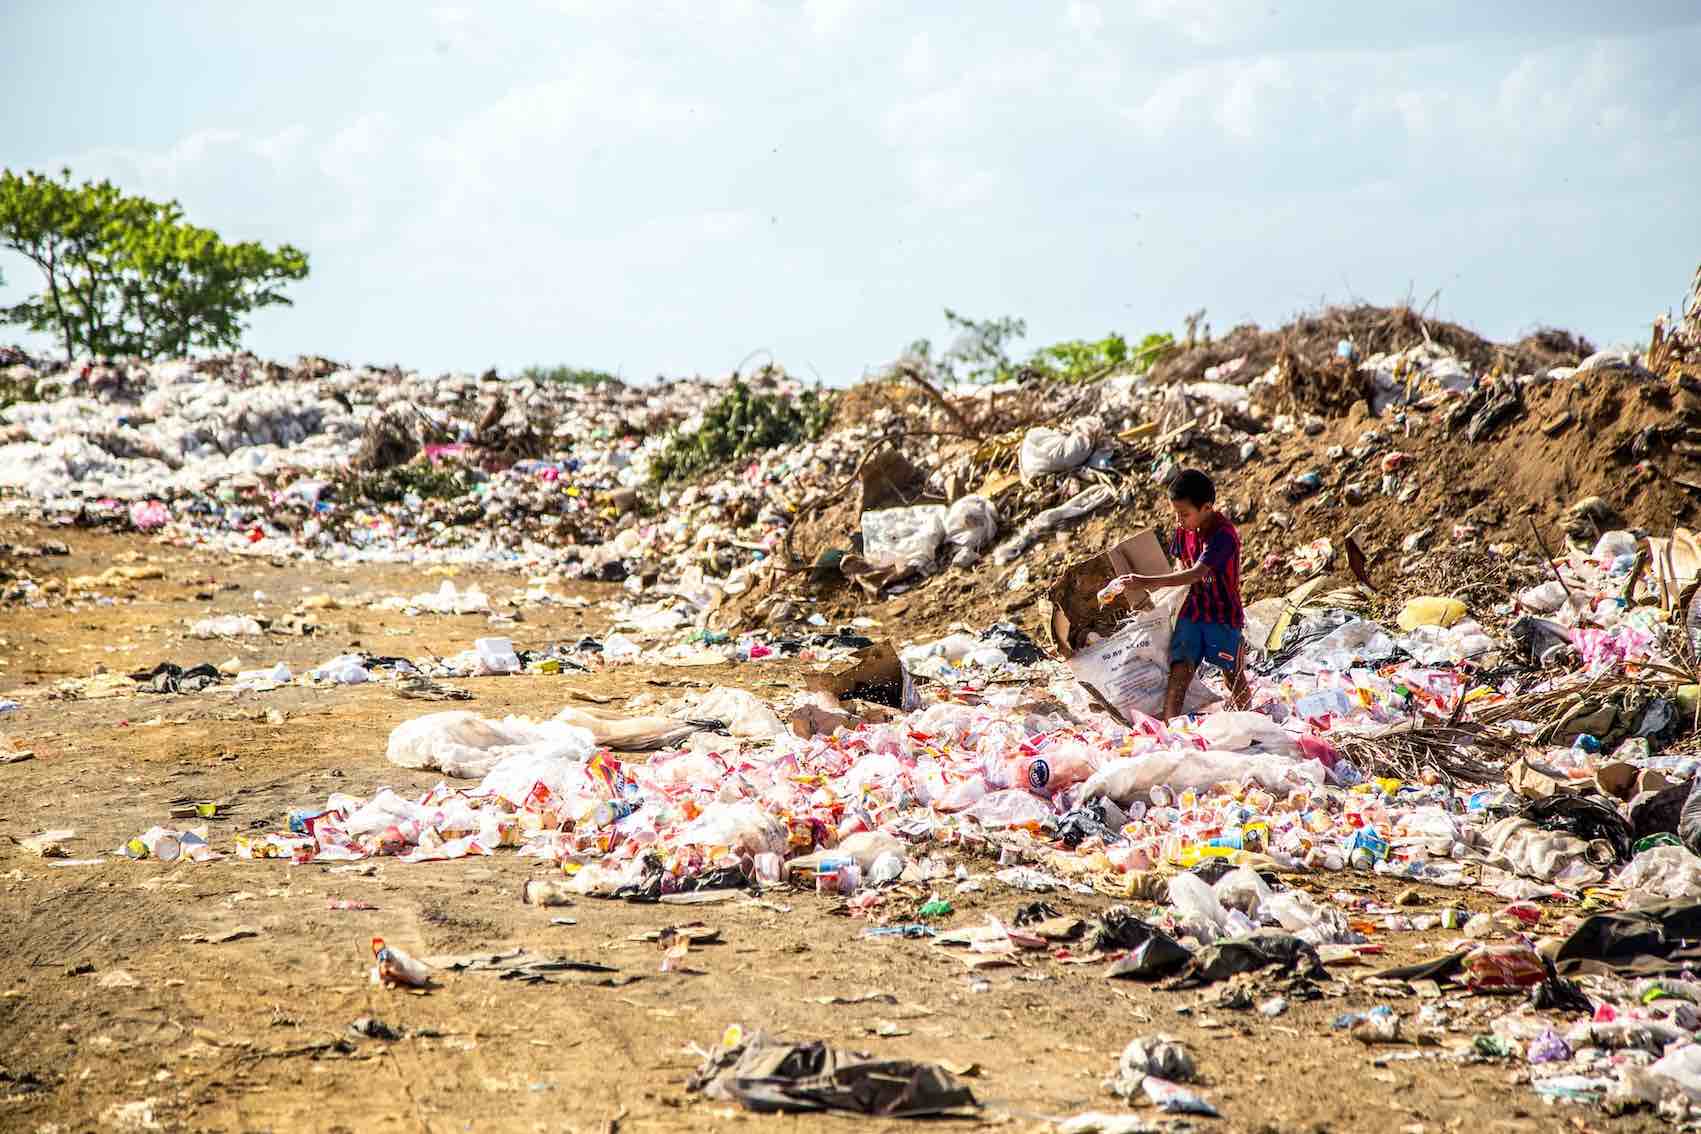 the issue with infinite growth: overfilling landfills